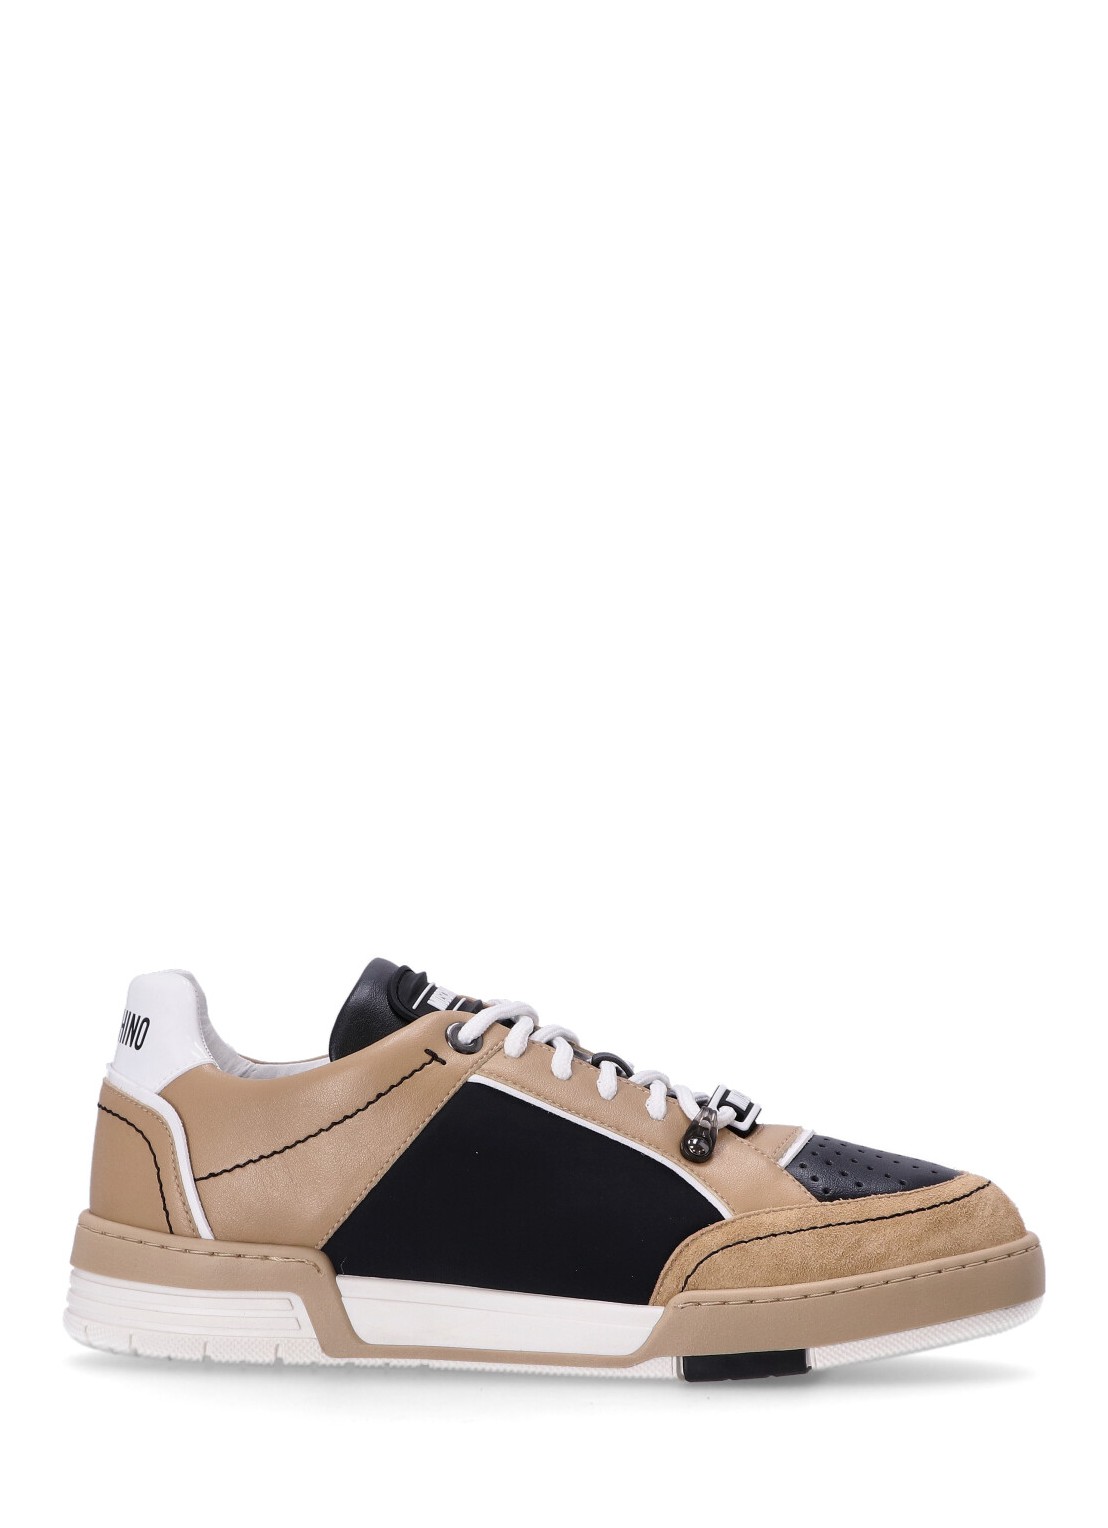 Sneaker moschino couture m.sneakers - mb15614g1igna 00a talla 45
 